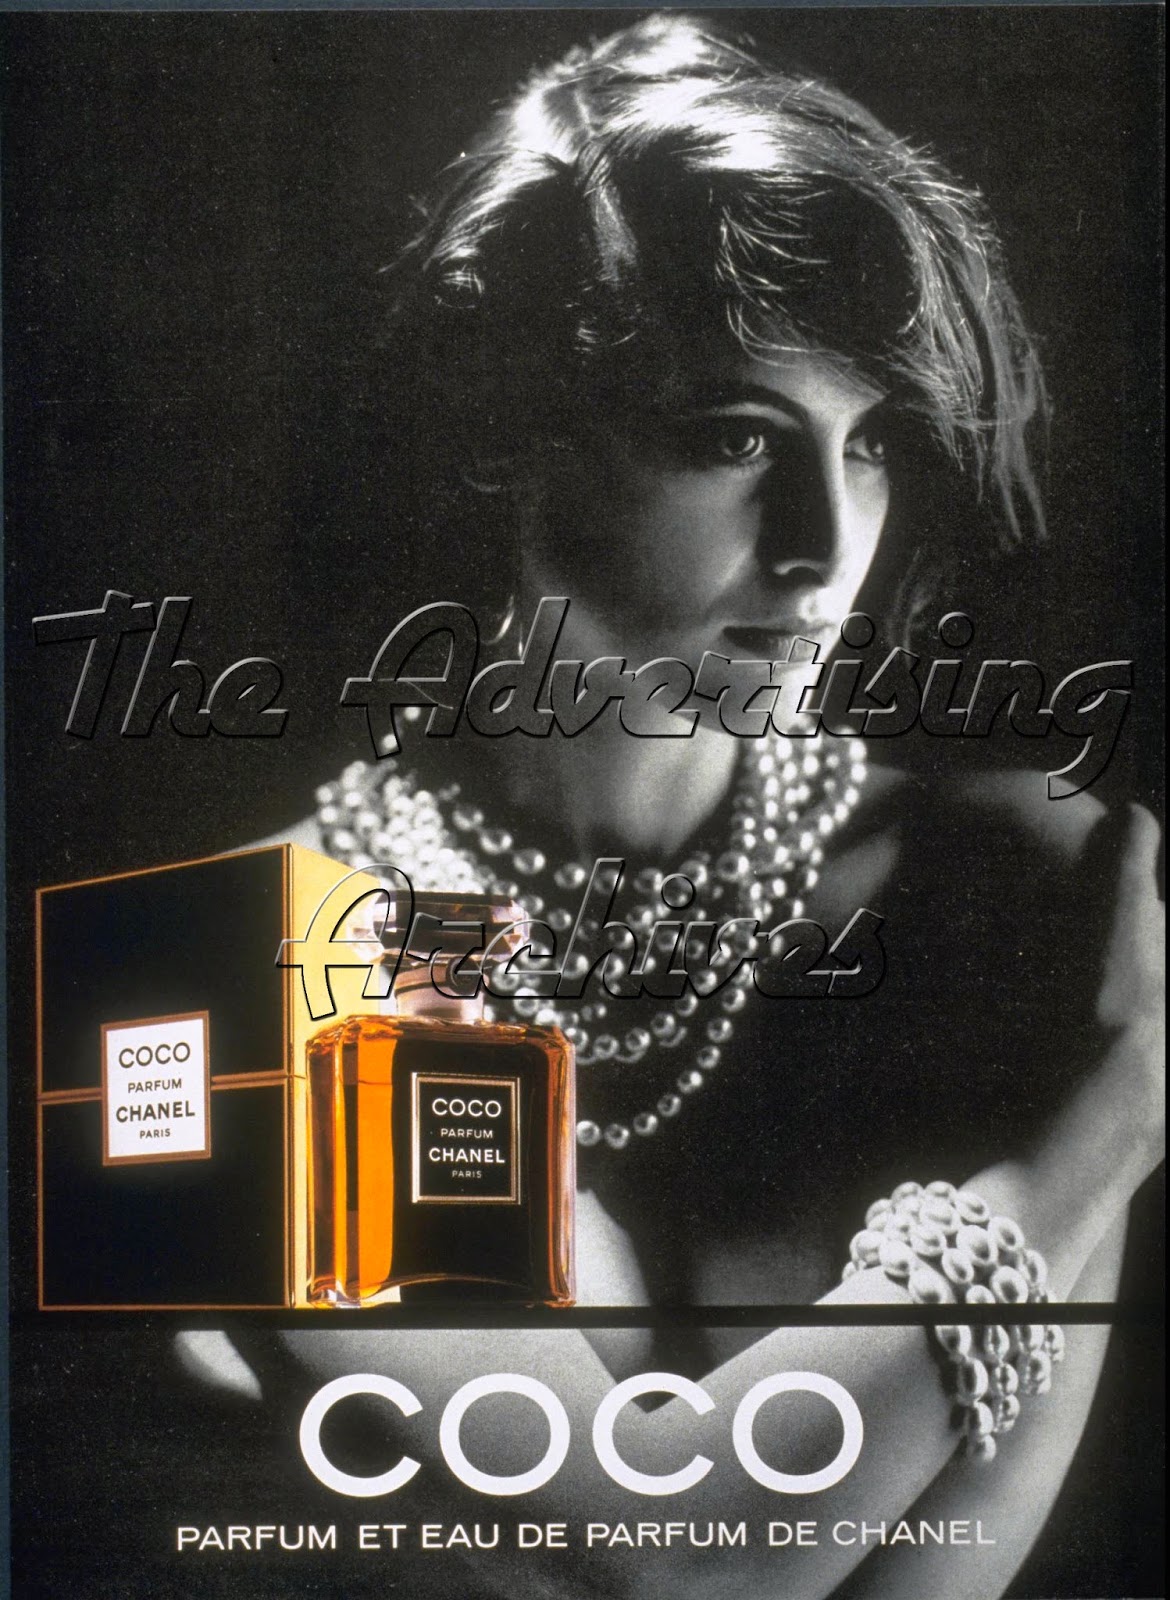 The Advertising Archives: Magnifique Chanel!